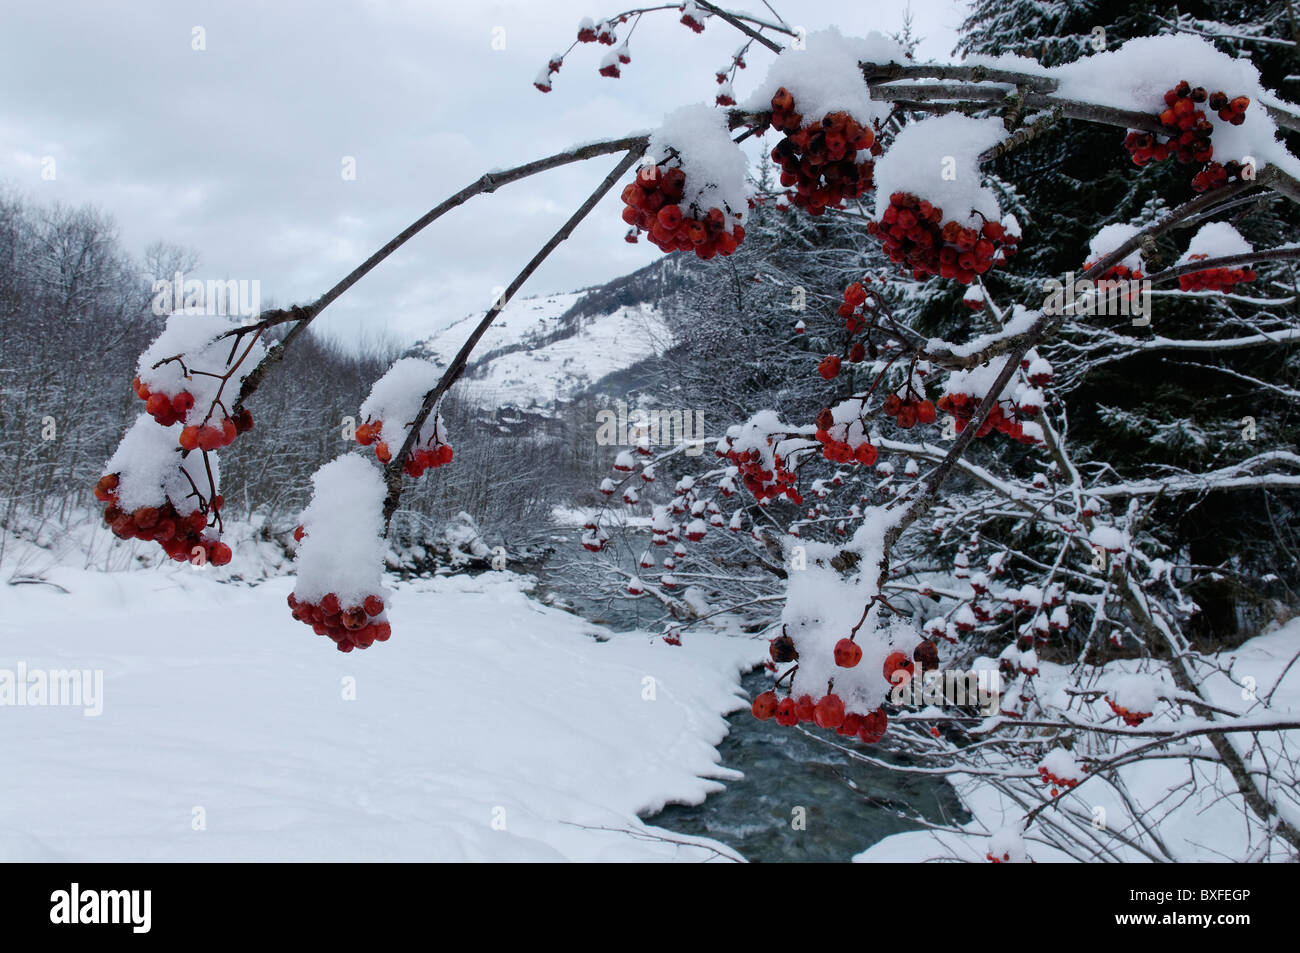 A berry laden tree in winter. Stock Photo